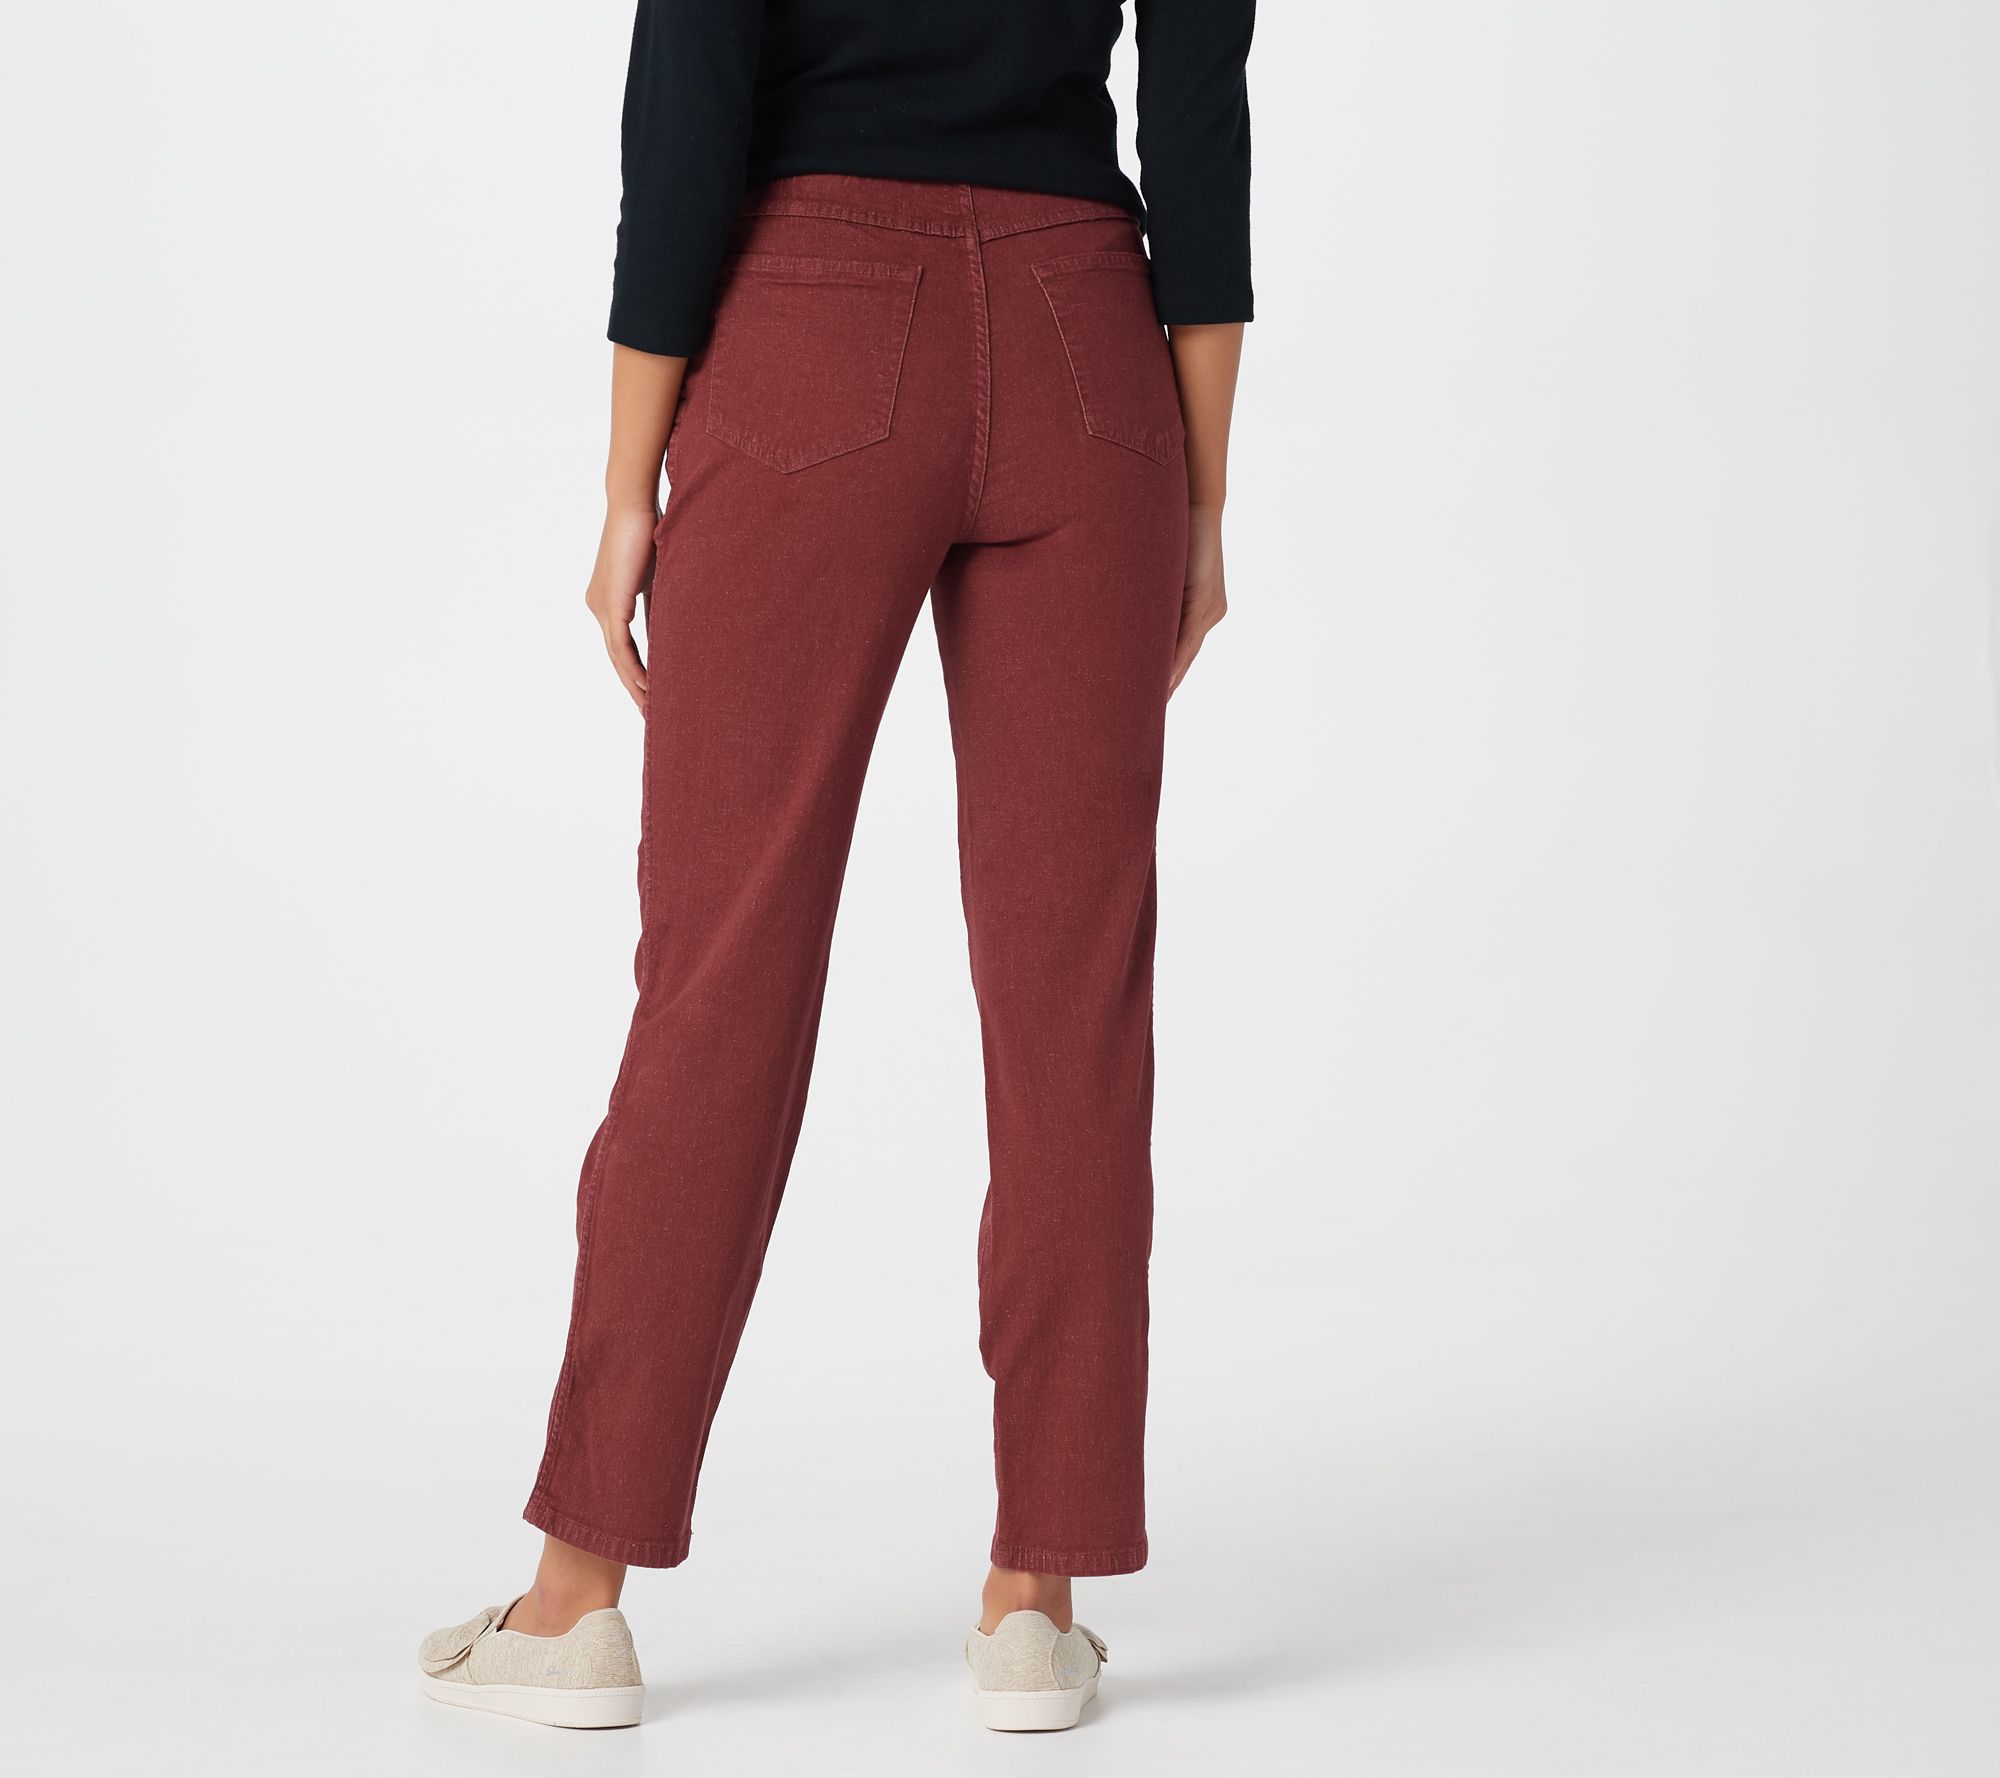 Scarlet Wine,Size PS Style Co Petite Womens Skinny Pull-On Pants 